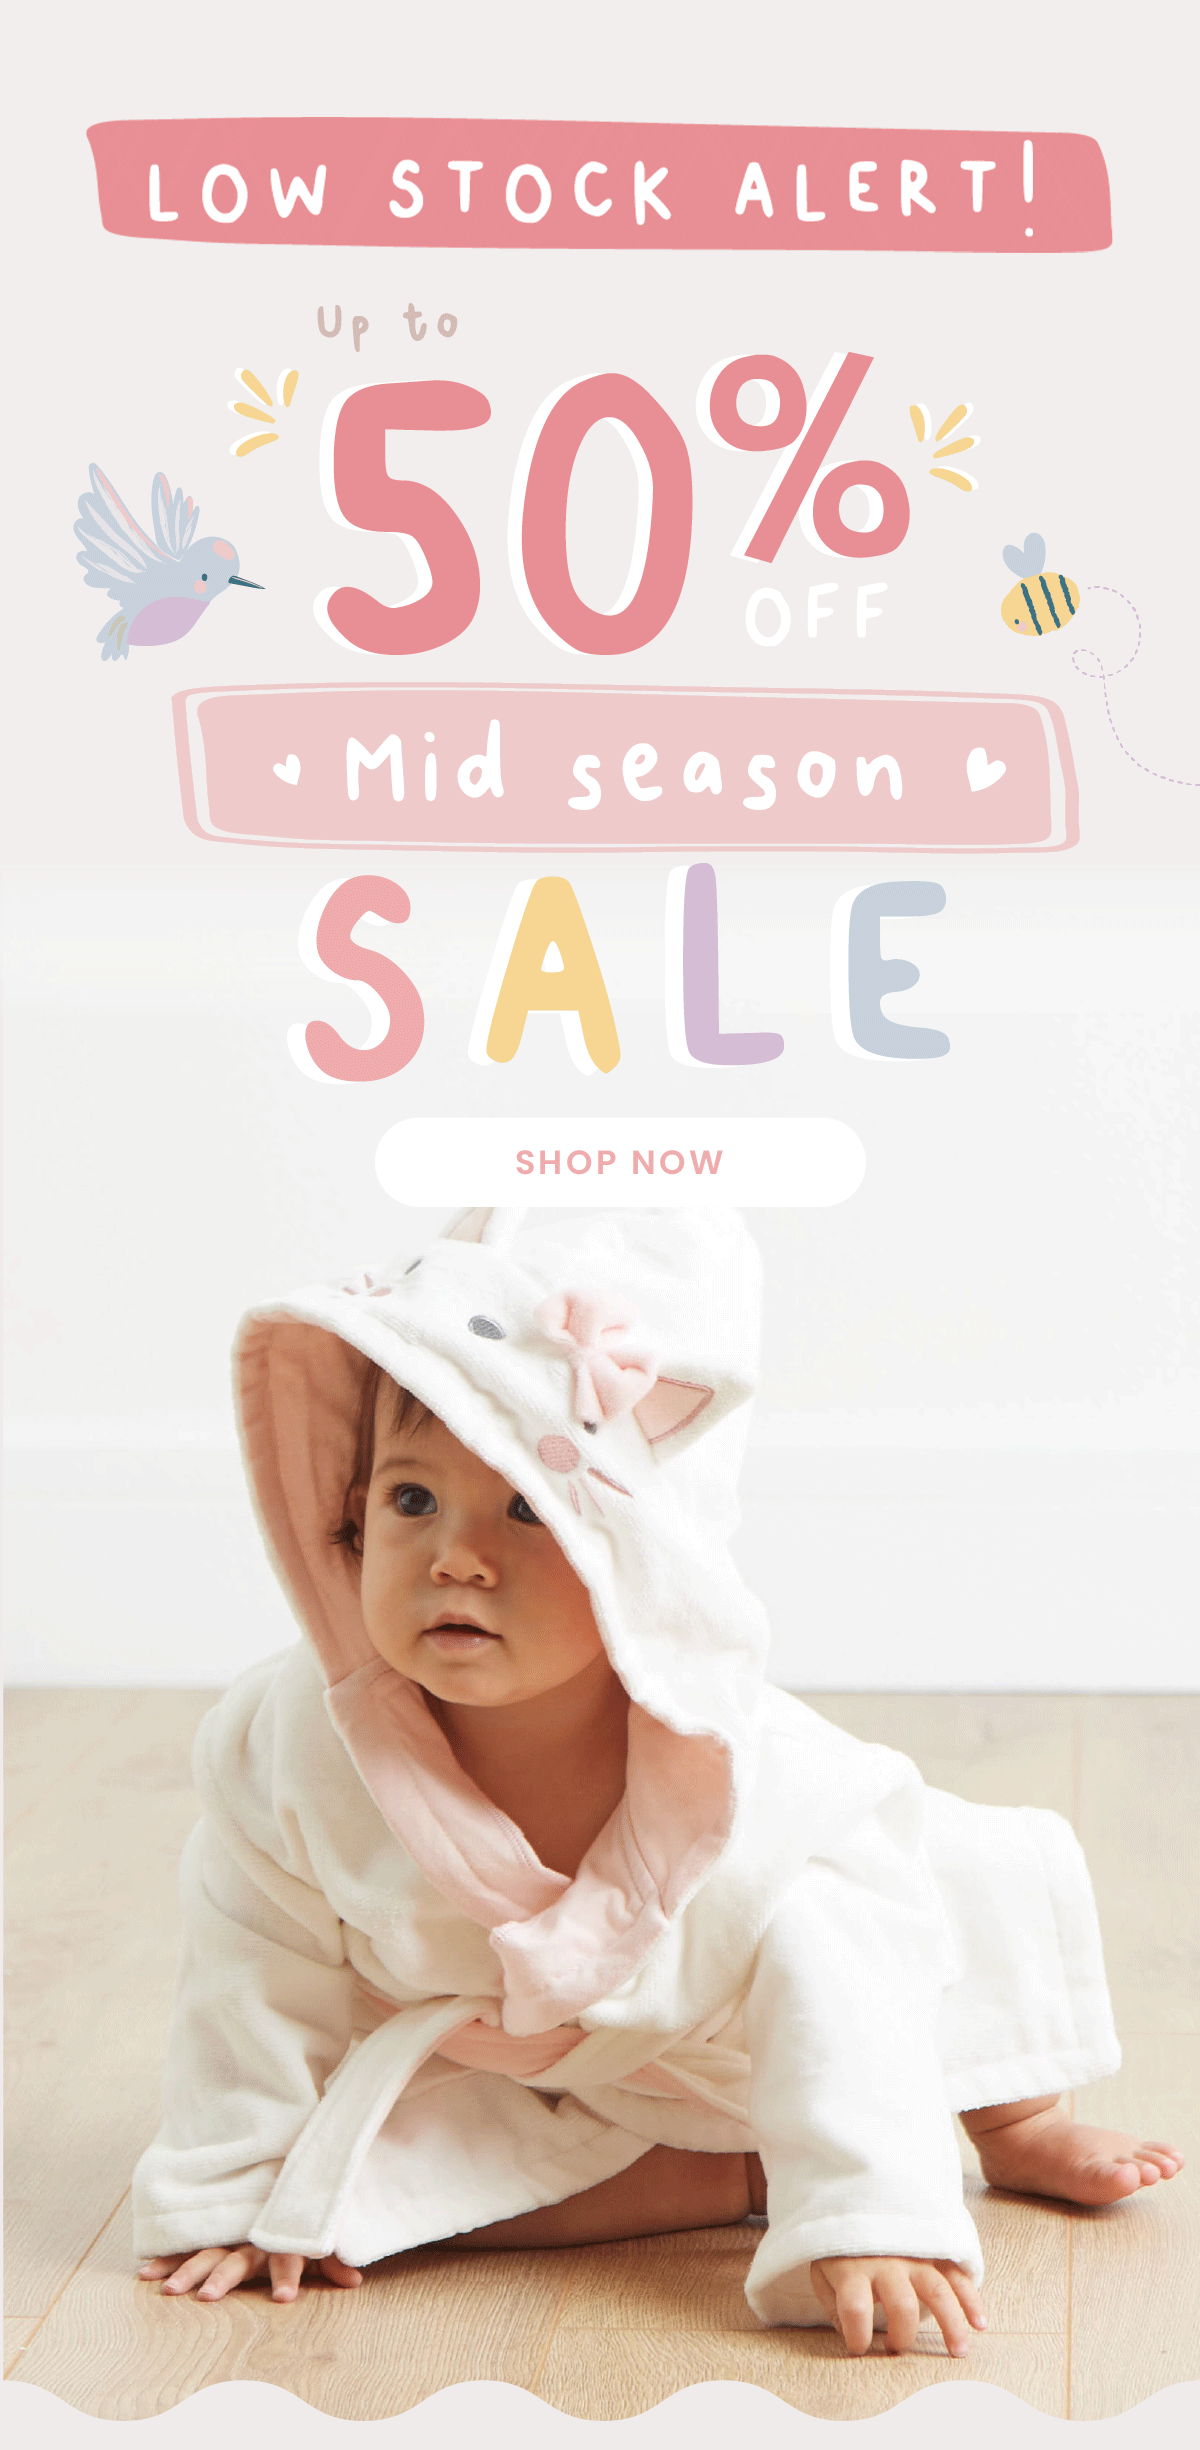 Up to 50% off in our Mid Season Sale